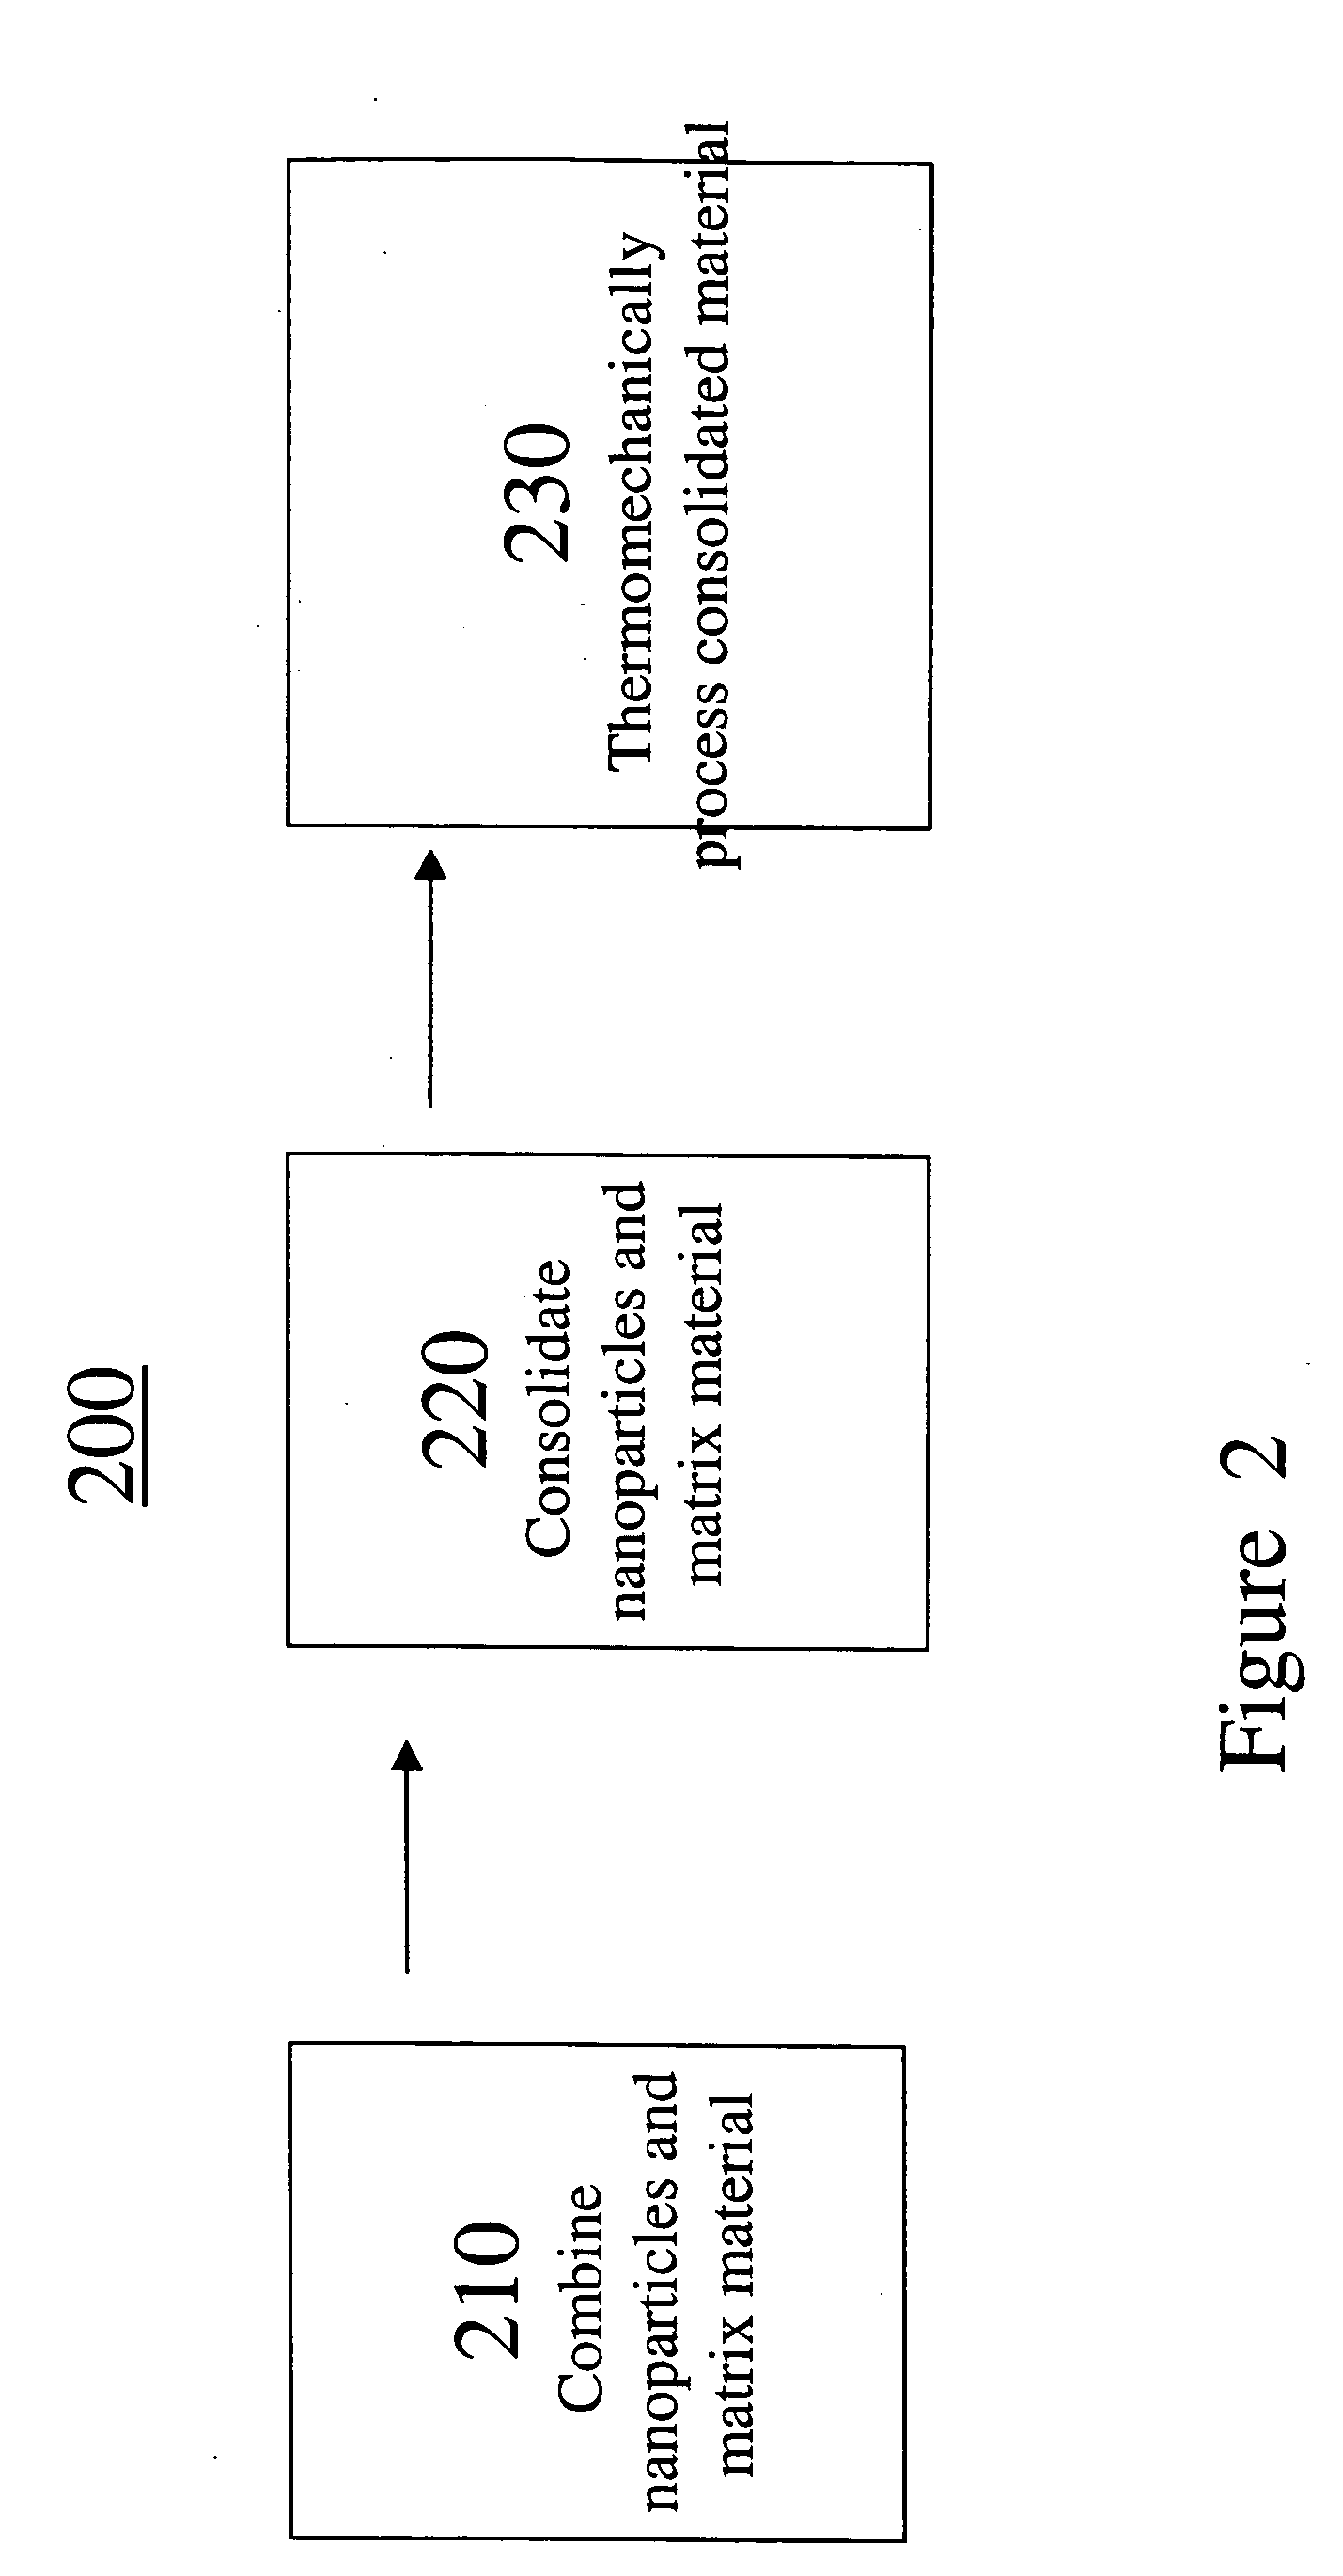 Metallic alloy nanocomposite for high-temperature structural components and methods of making